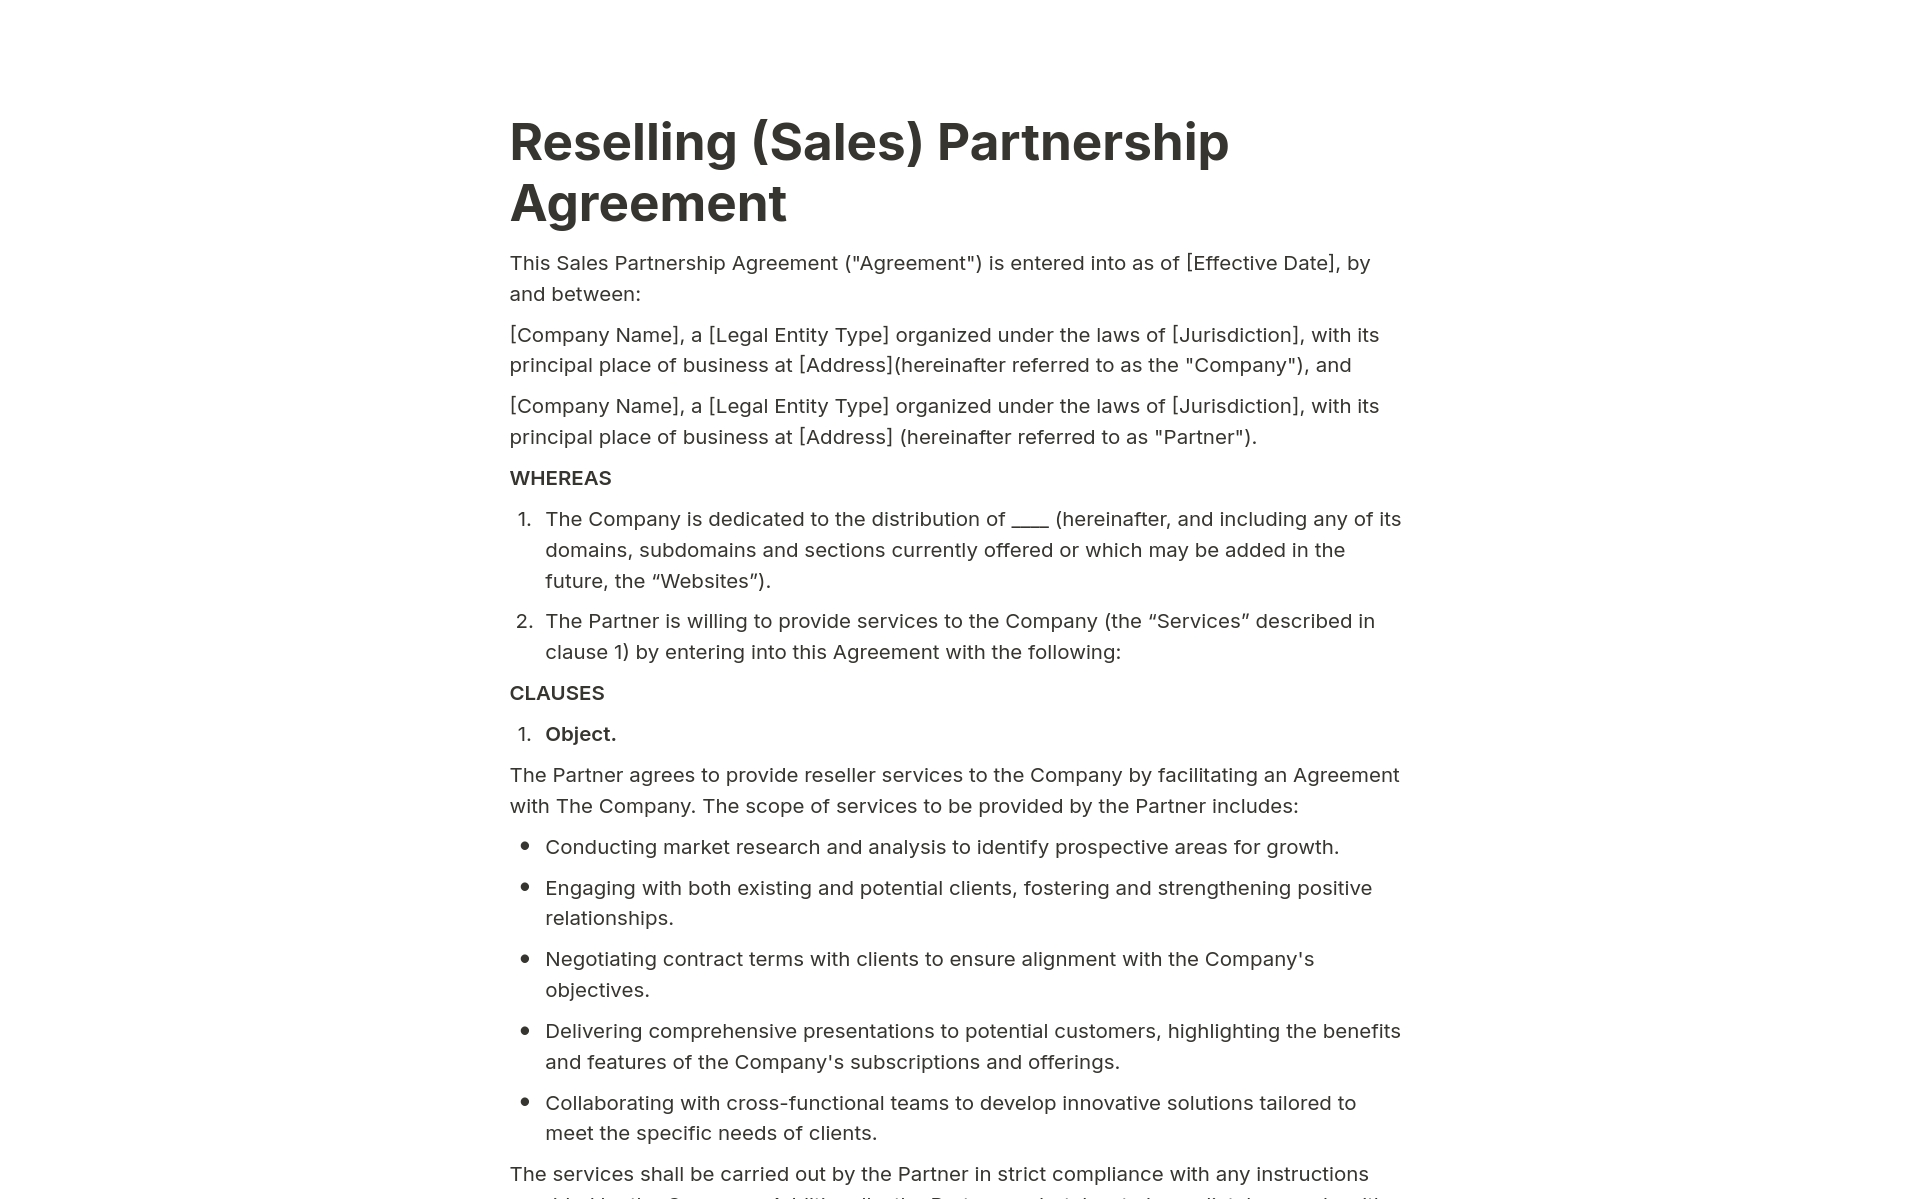 Streamline your sales partnerships with our professionally crafted Reselling (Sales) Partnership Agreement Template in Notion